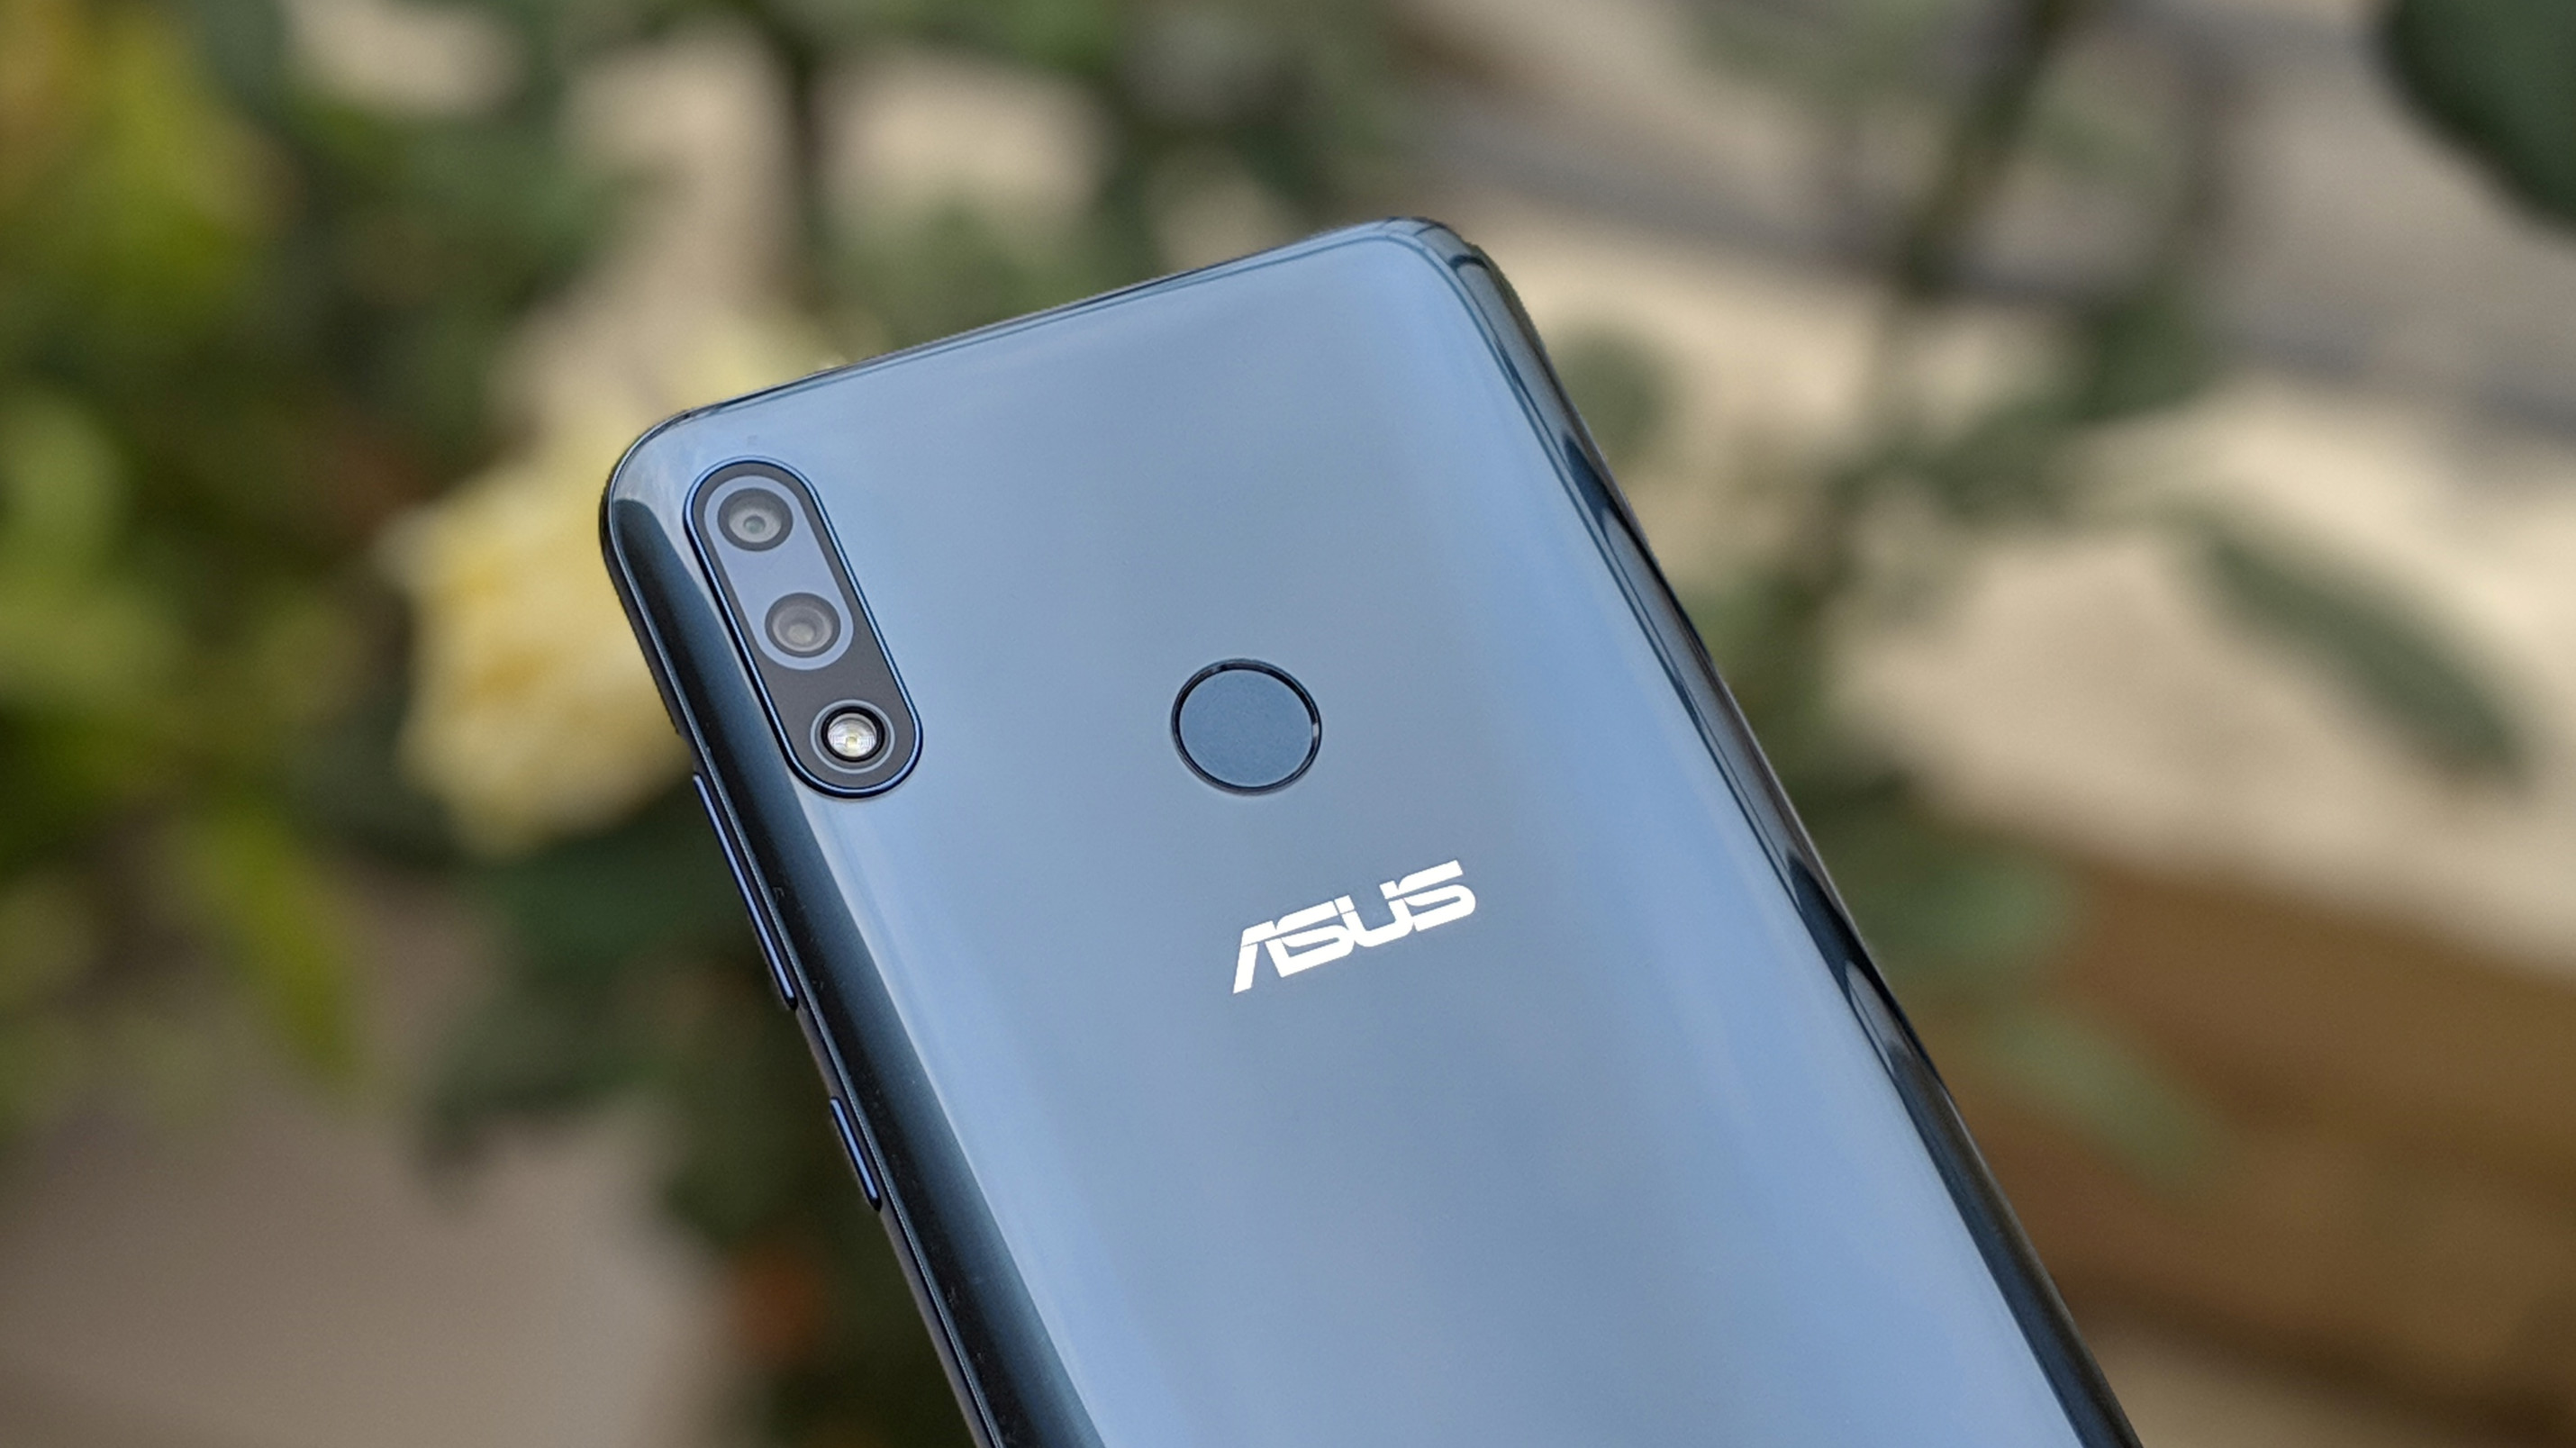 Asus launches Zenfone Max M2 and Max Pro M2 in India - Android Authority